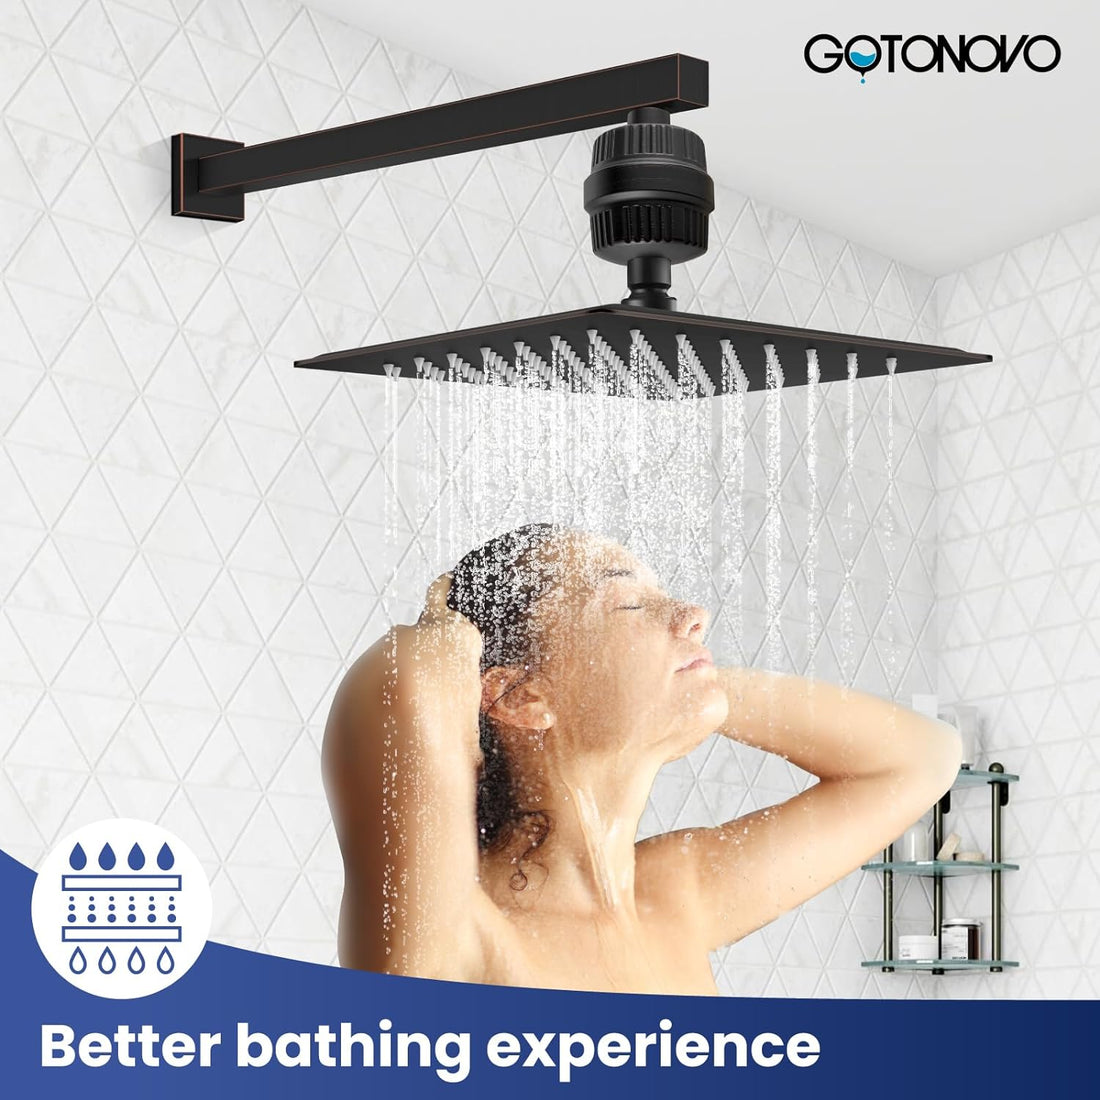 gotonovo 20 Stage Shower Head Filter for Hard Water,Shower Filter with 2 Replaceable Cartridges, High Pressure Shower Water Filter Removes Odors and Impurities Oil Rubbed Bronze